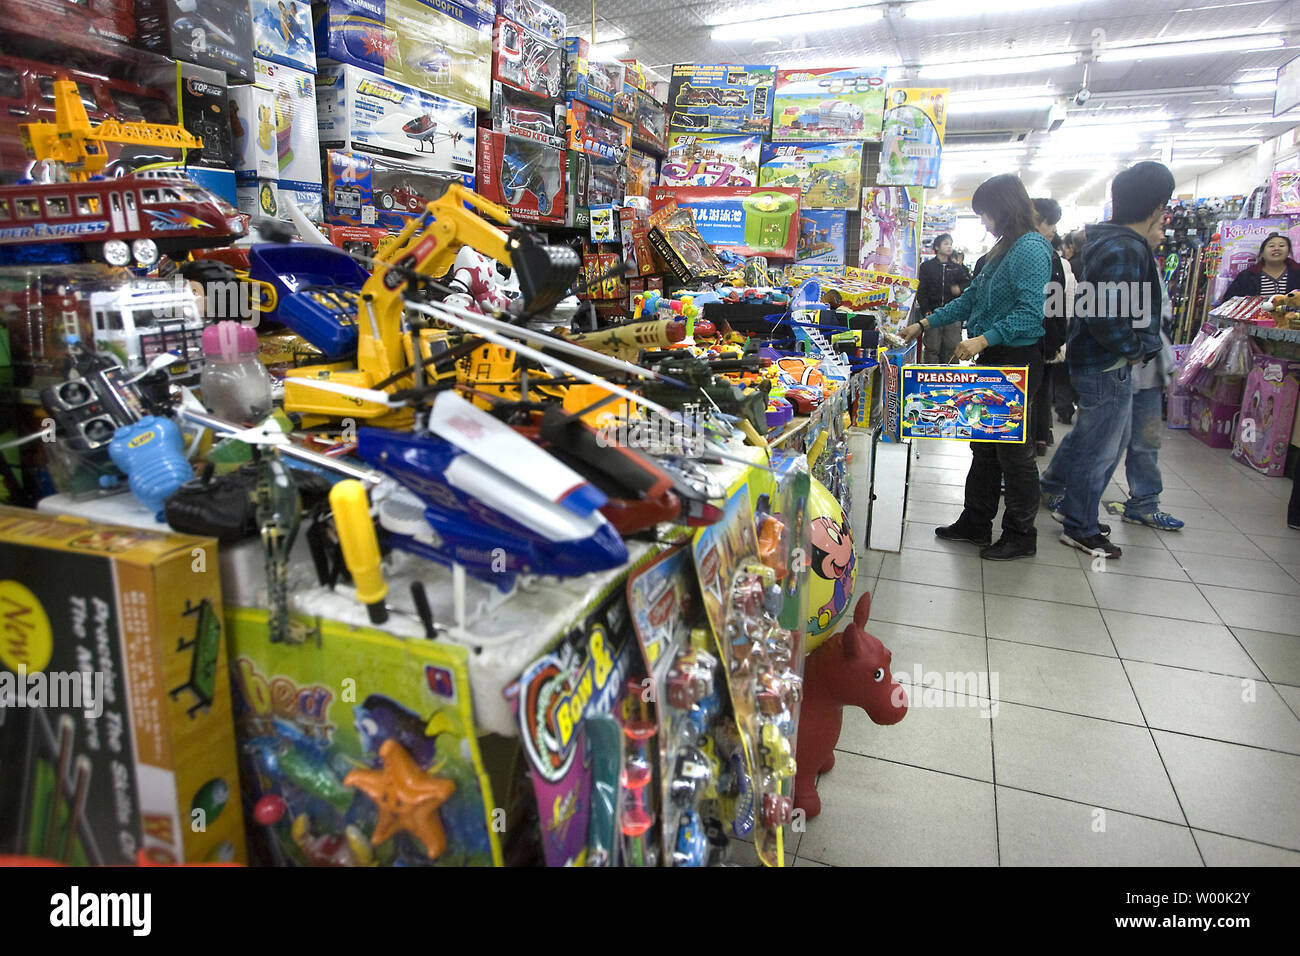 Chinese shop for 'made-in-China' toys at a popular toy outlet in central Beijing November 26, 2008.  Chinese toy makers must not accept orders based on unsafe foreign designs, the Foreign Ministry said on Tuesday, as the country seeks to assure quality ahead of Christmas.  (UPI Photo/Stephen Shaver) Stock Photo